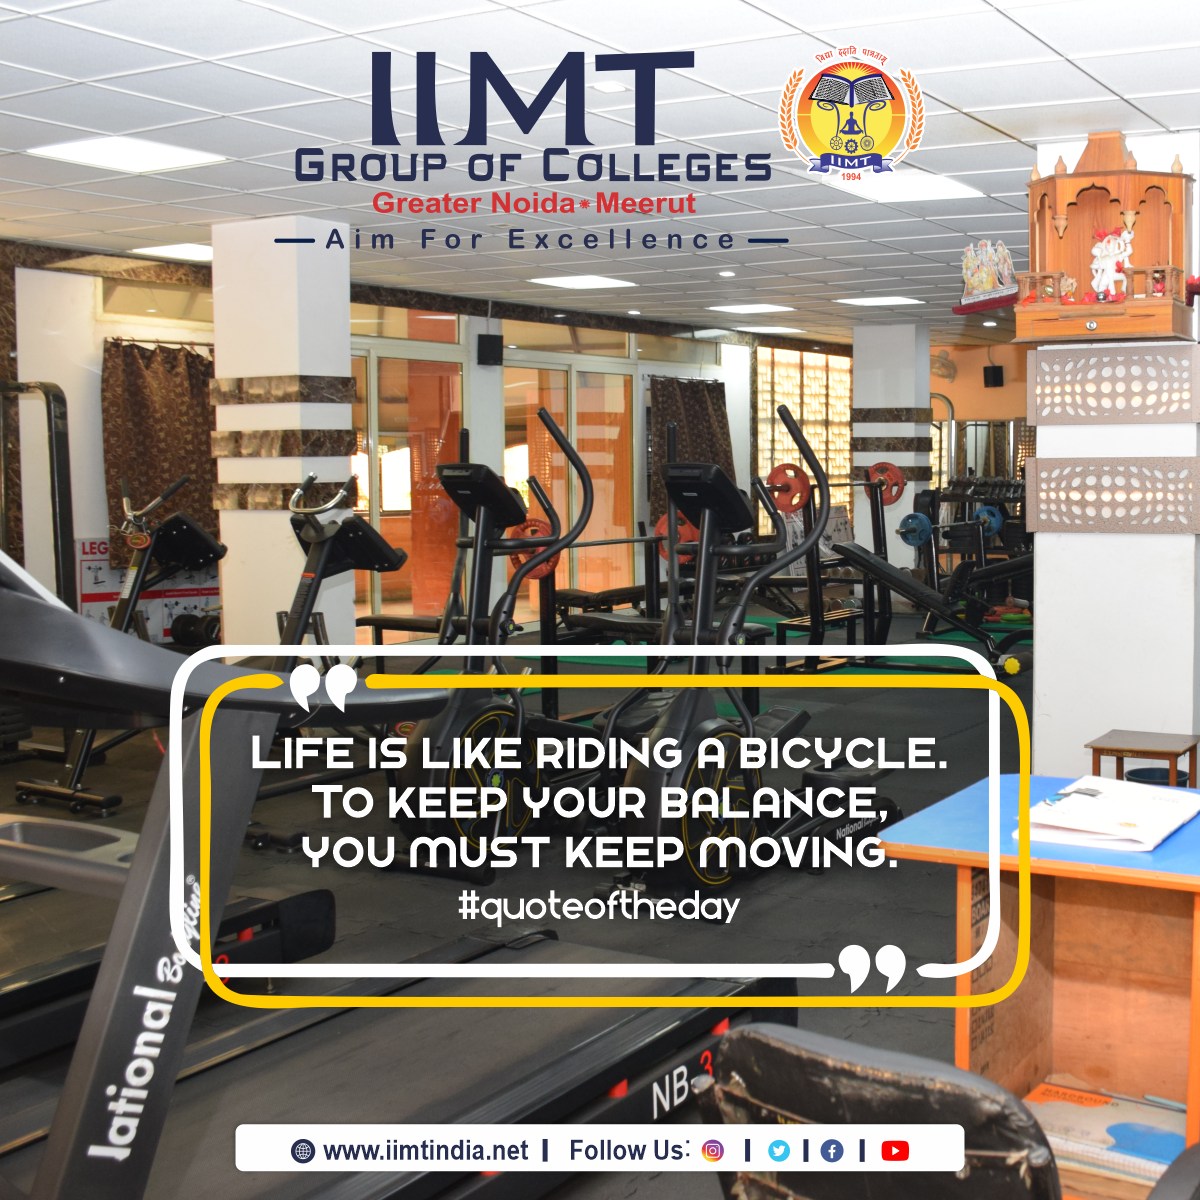 'Life is like riding a bicycle. To keep your balance, you must keep moving.'
.
iimtindia.net
Call Us: 9520886860
.
#quoteoftheday #thoughtoftheday #IIMTIndia #AdmissionOpen2024
#EngineeringCollege #AKTUadmission
#MBAadmission #MCAadmission2024
#CollegeofPharmacy